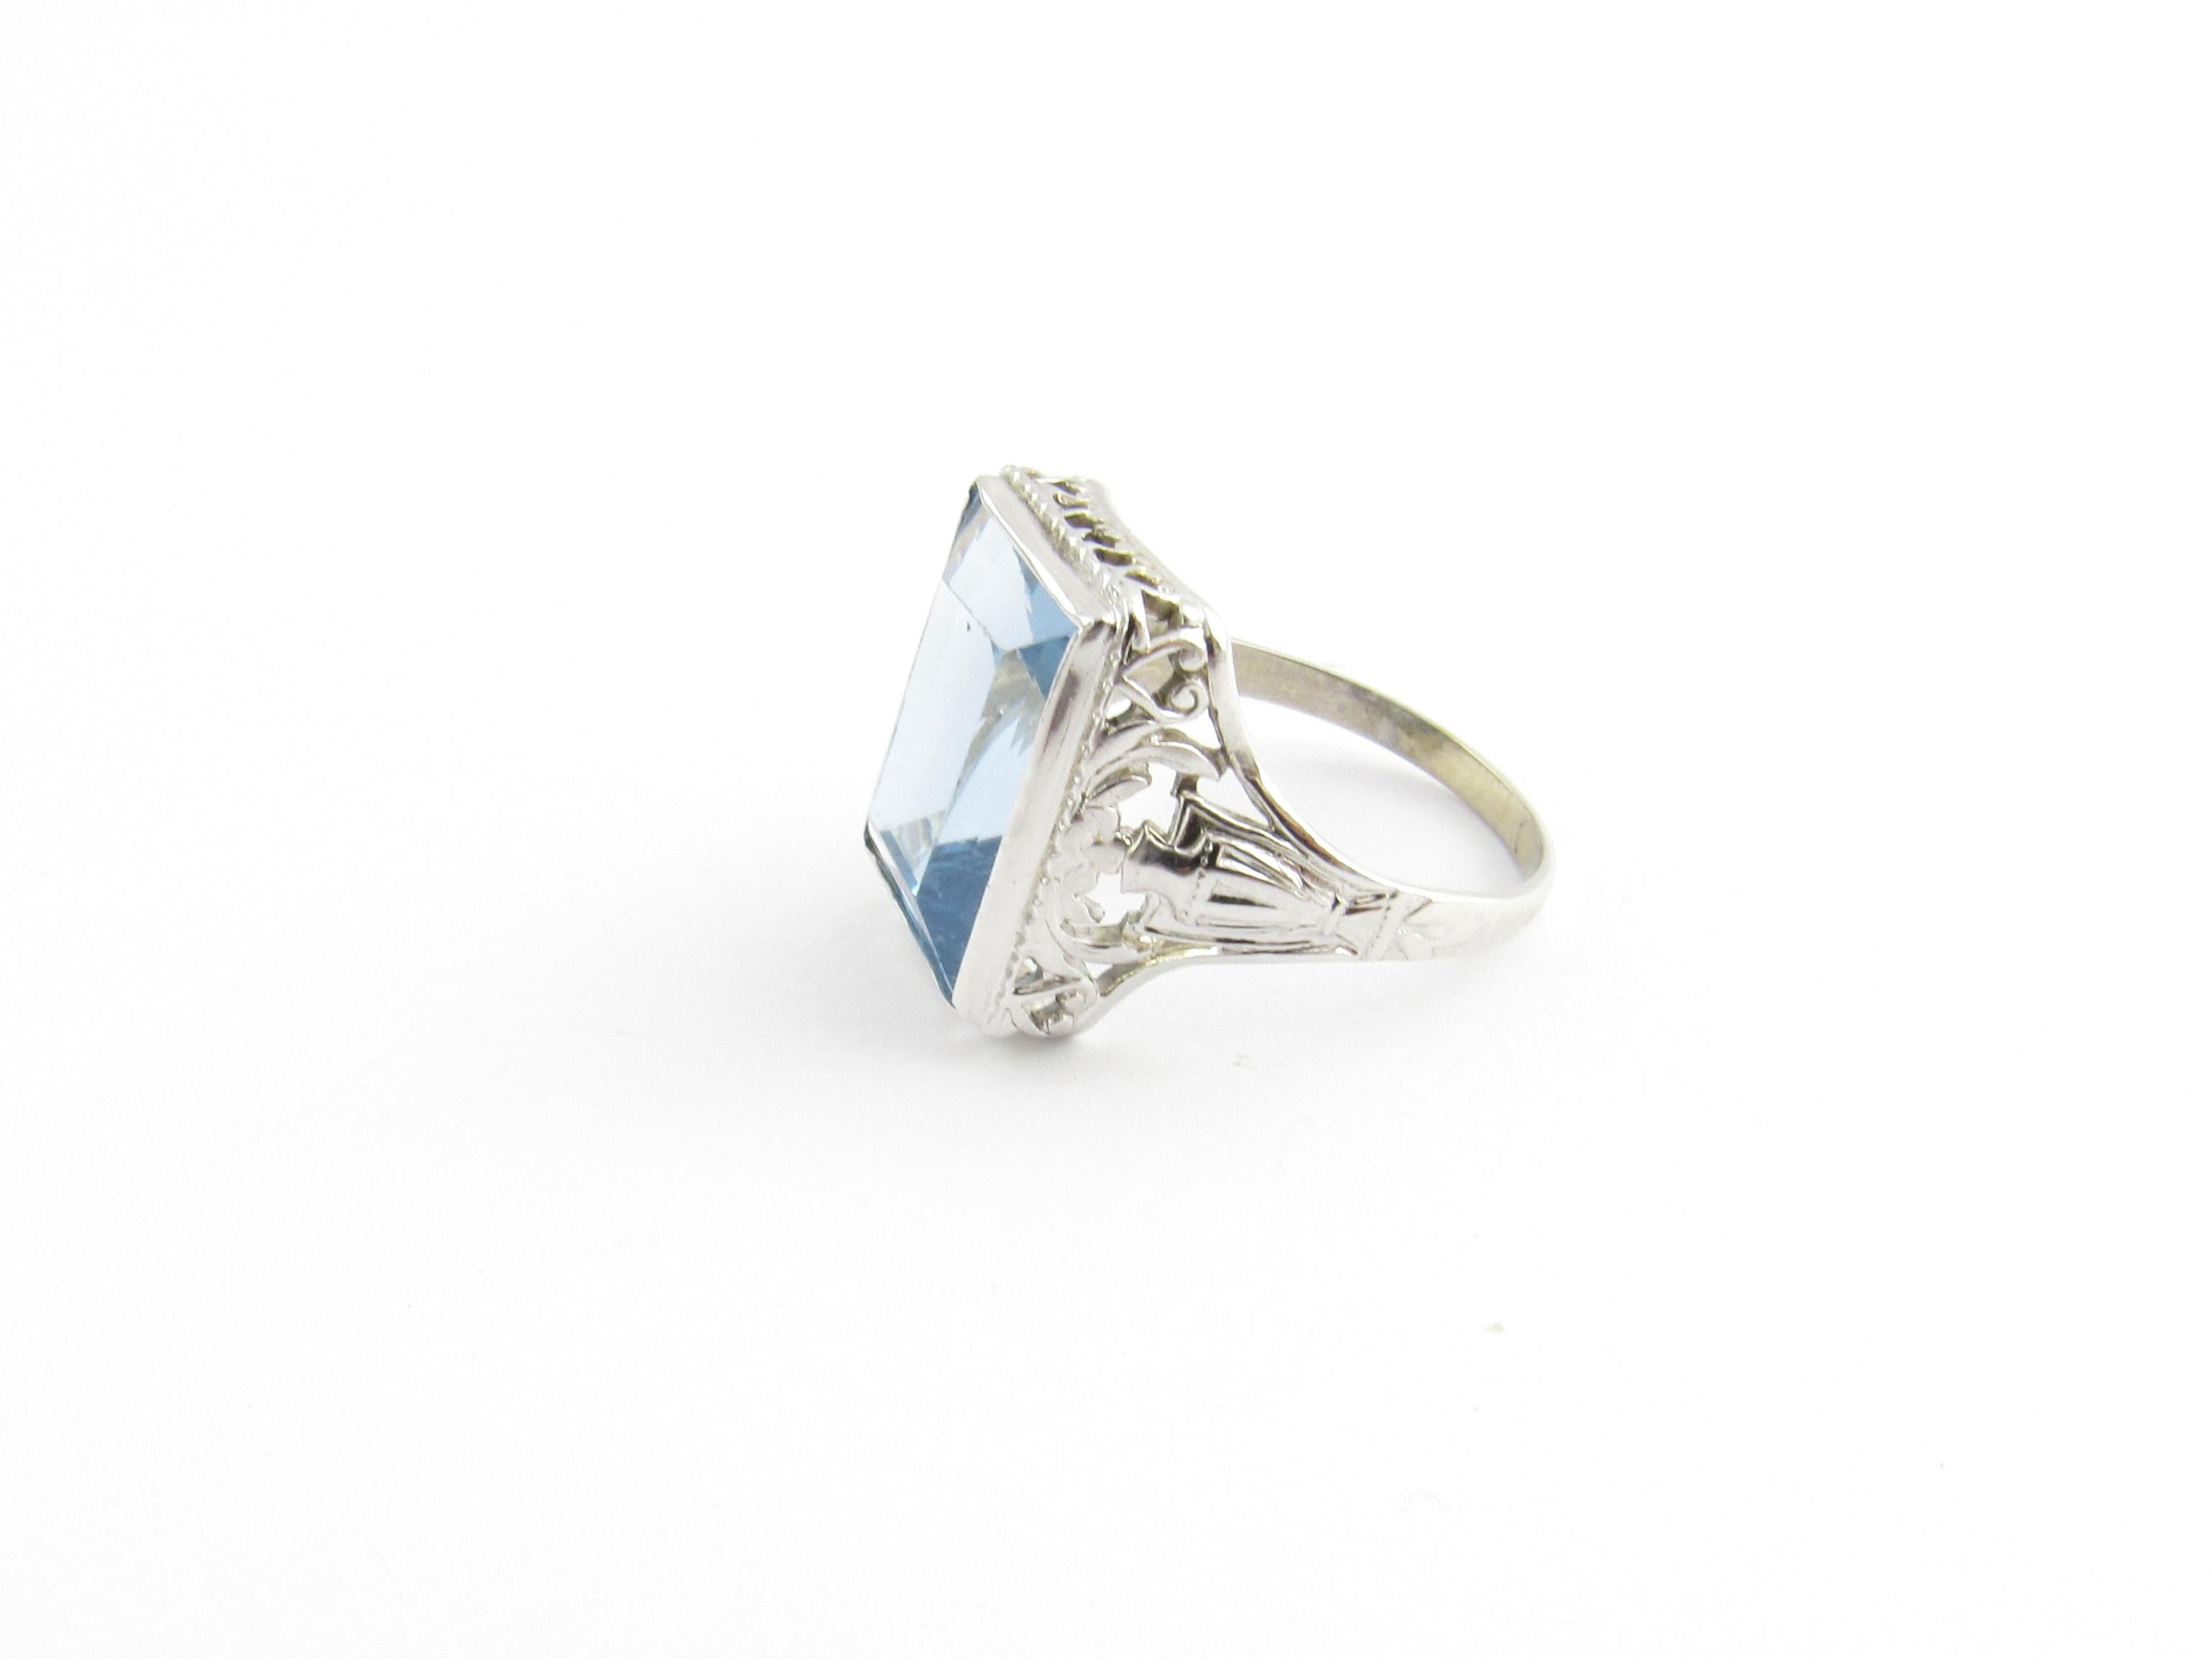 14 Karat White Gold Simulated Blue Topaz Ring Size 7-

This lovely ring features one rectangular simulated blue topaz (15 mm x 13 mm) set in beautifully detailed 14K white gold.  Shank measures 2 mm.

Ring Size:  7

Weight:  2.7 dwt. /  4.2 gr.